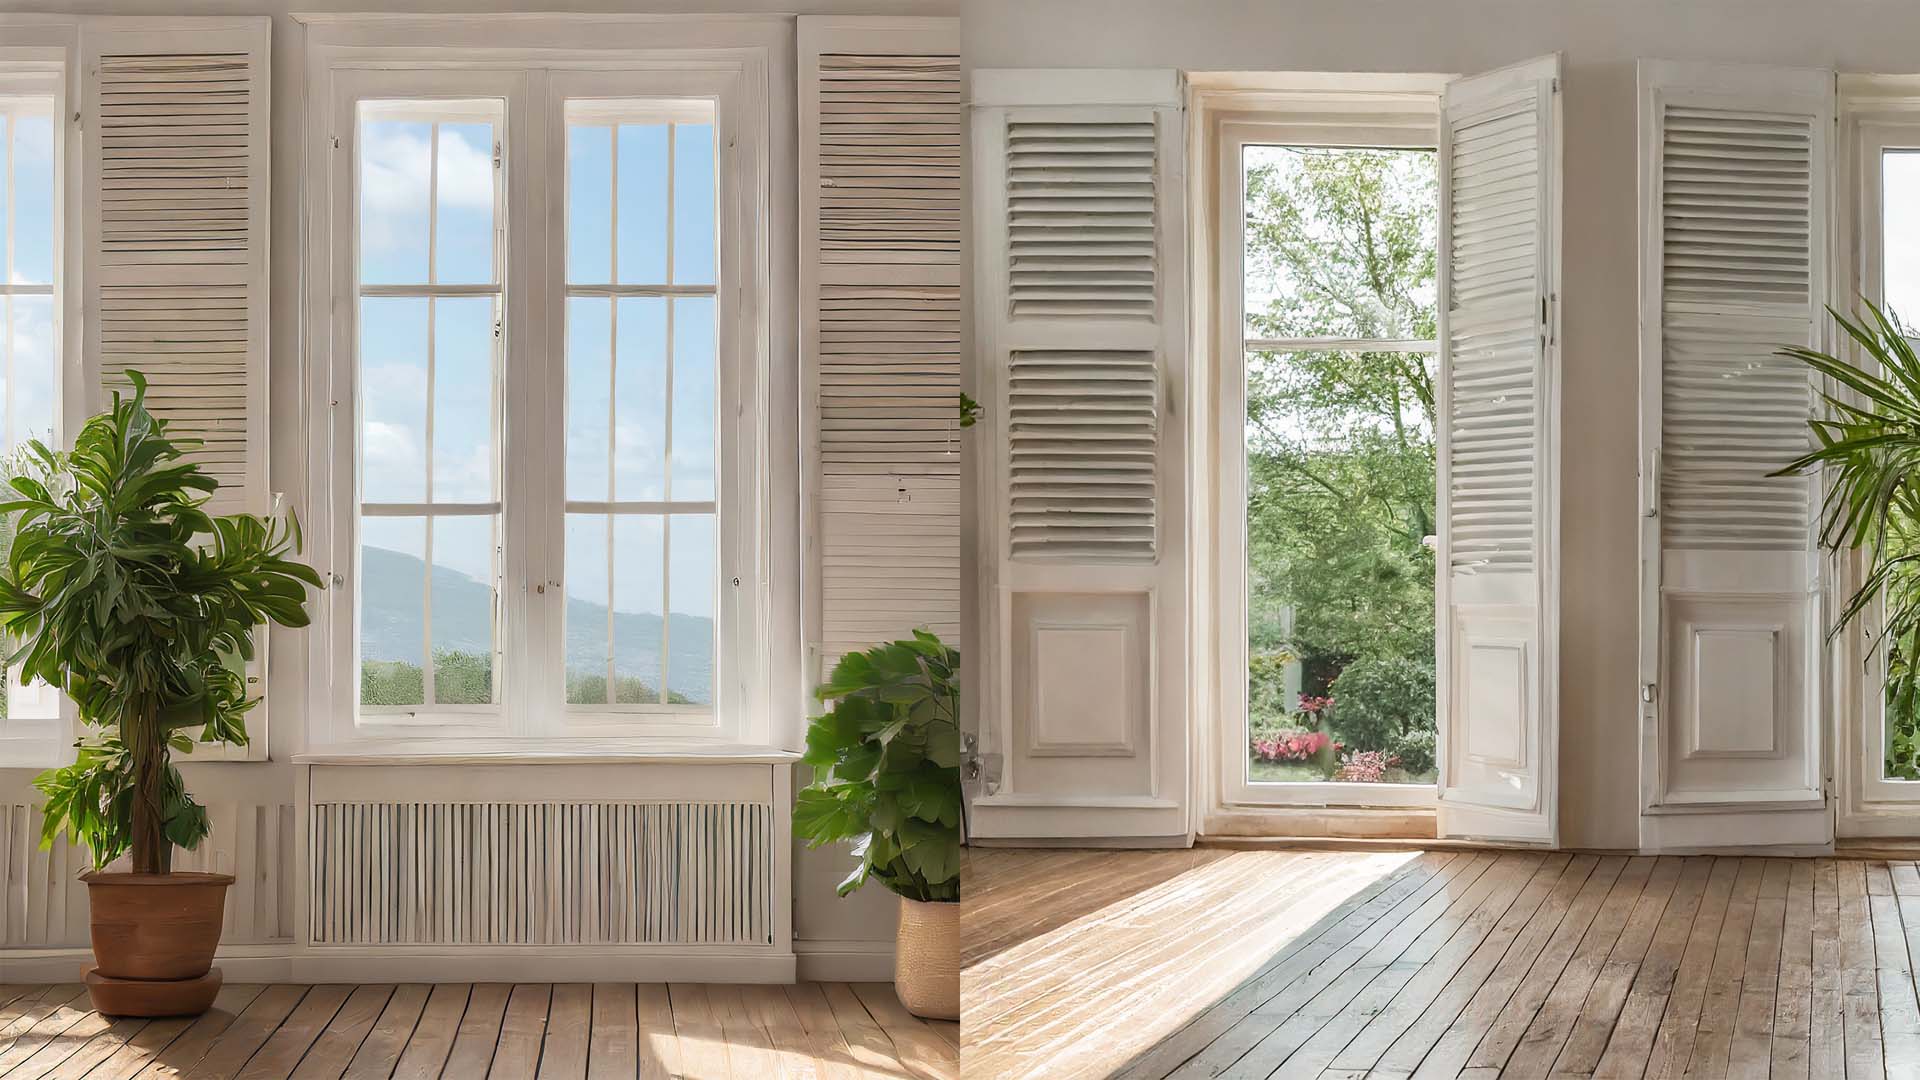 Transitional interior design style shutters.